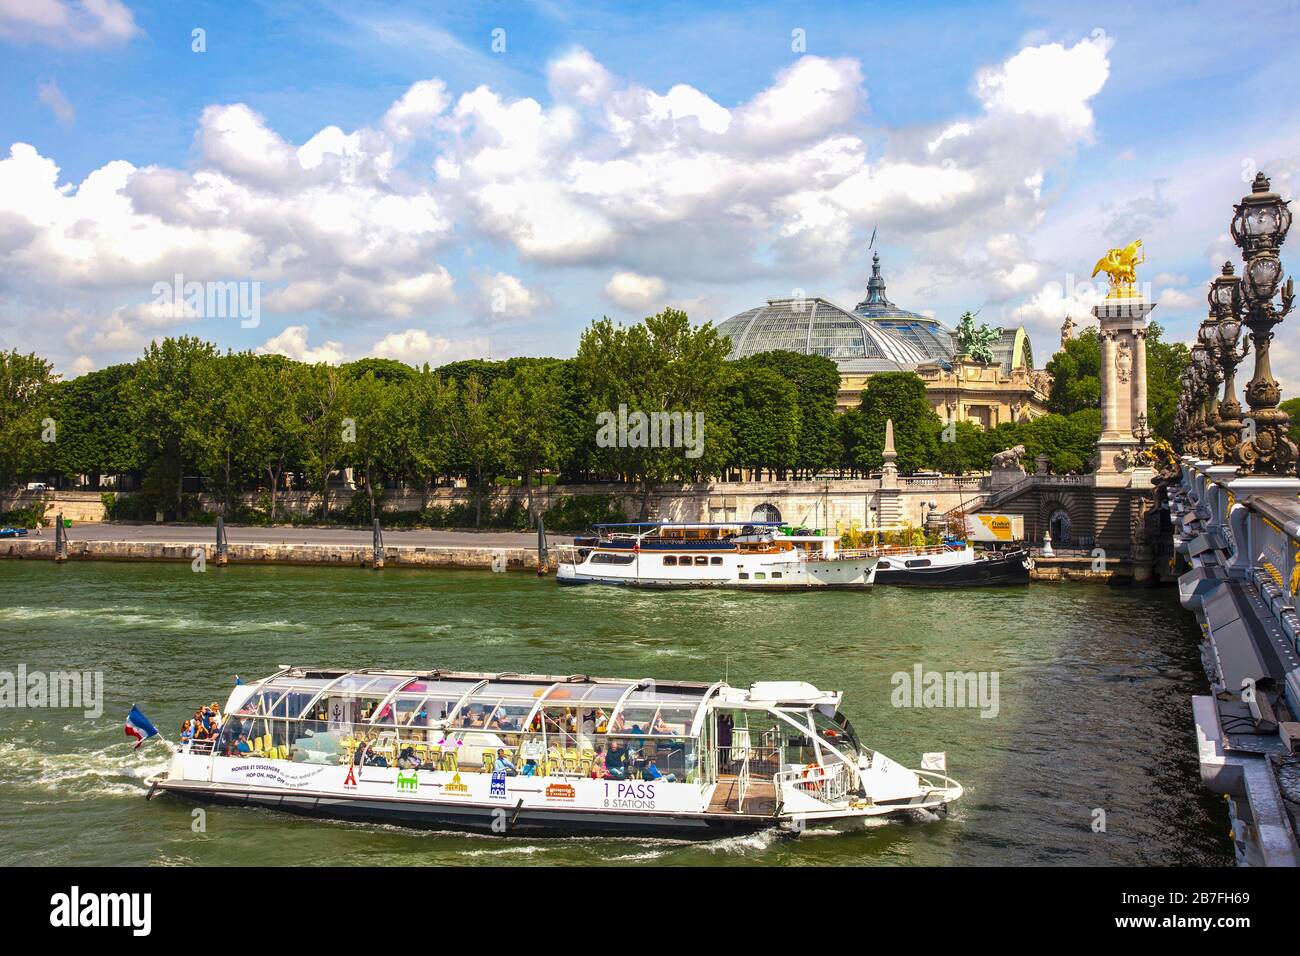 Bateaux Mouches on the Seine in Paris France Stock Photo